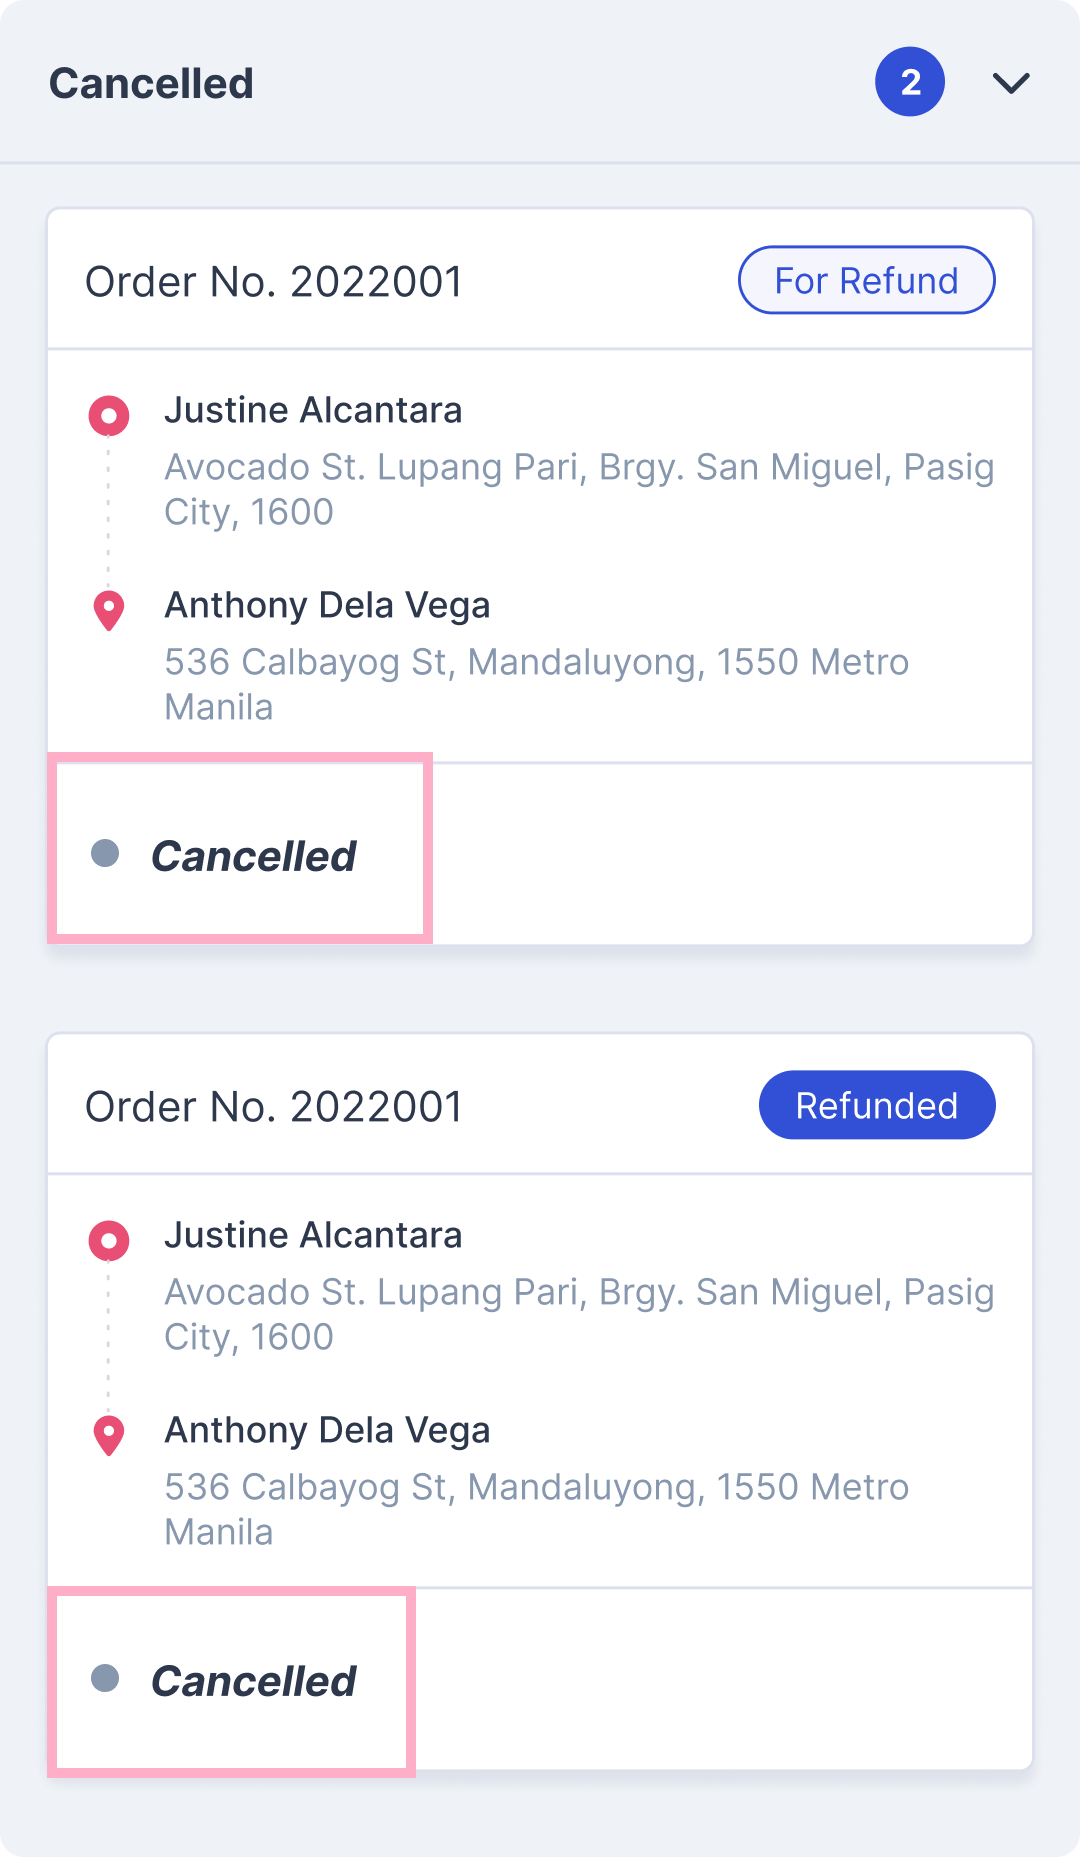 pending - cancelled